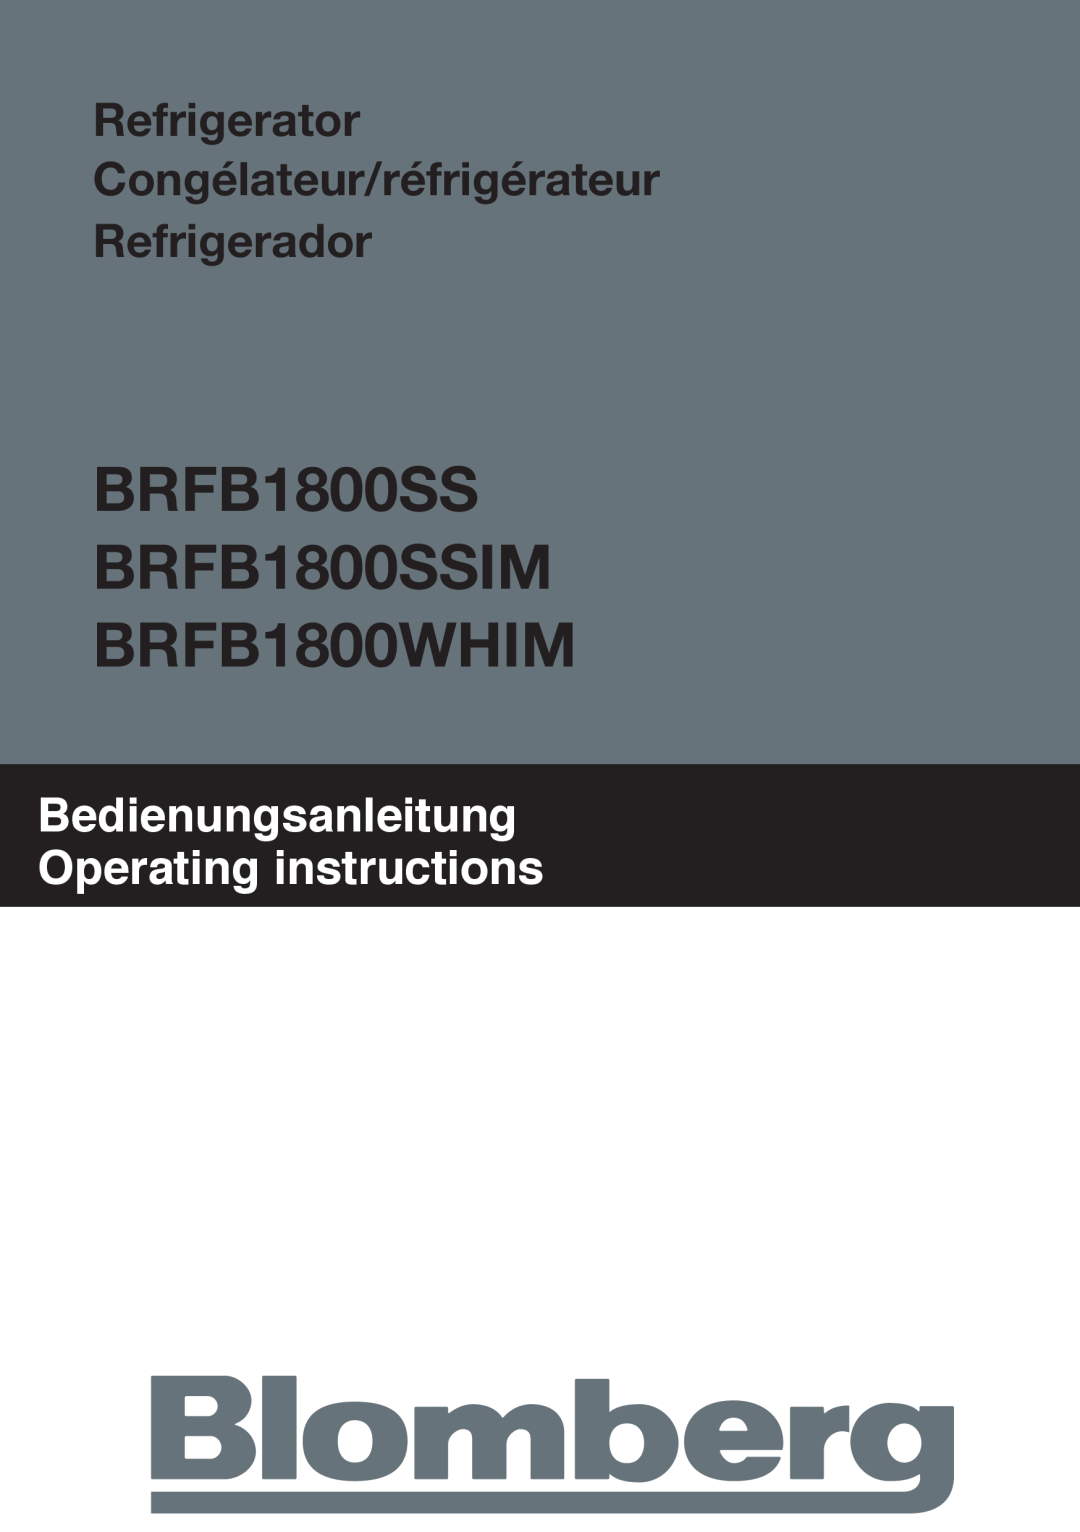 Blomberg operating instructions BRFB1800SS BRFB1800SSIM BRFB1800WHIM, Bedienungsanleitung Operating instructions 